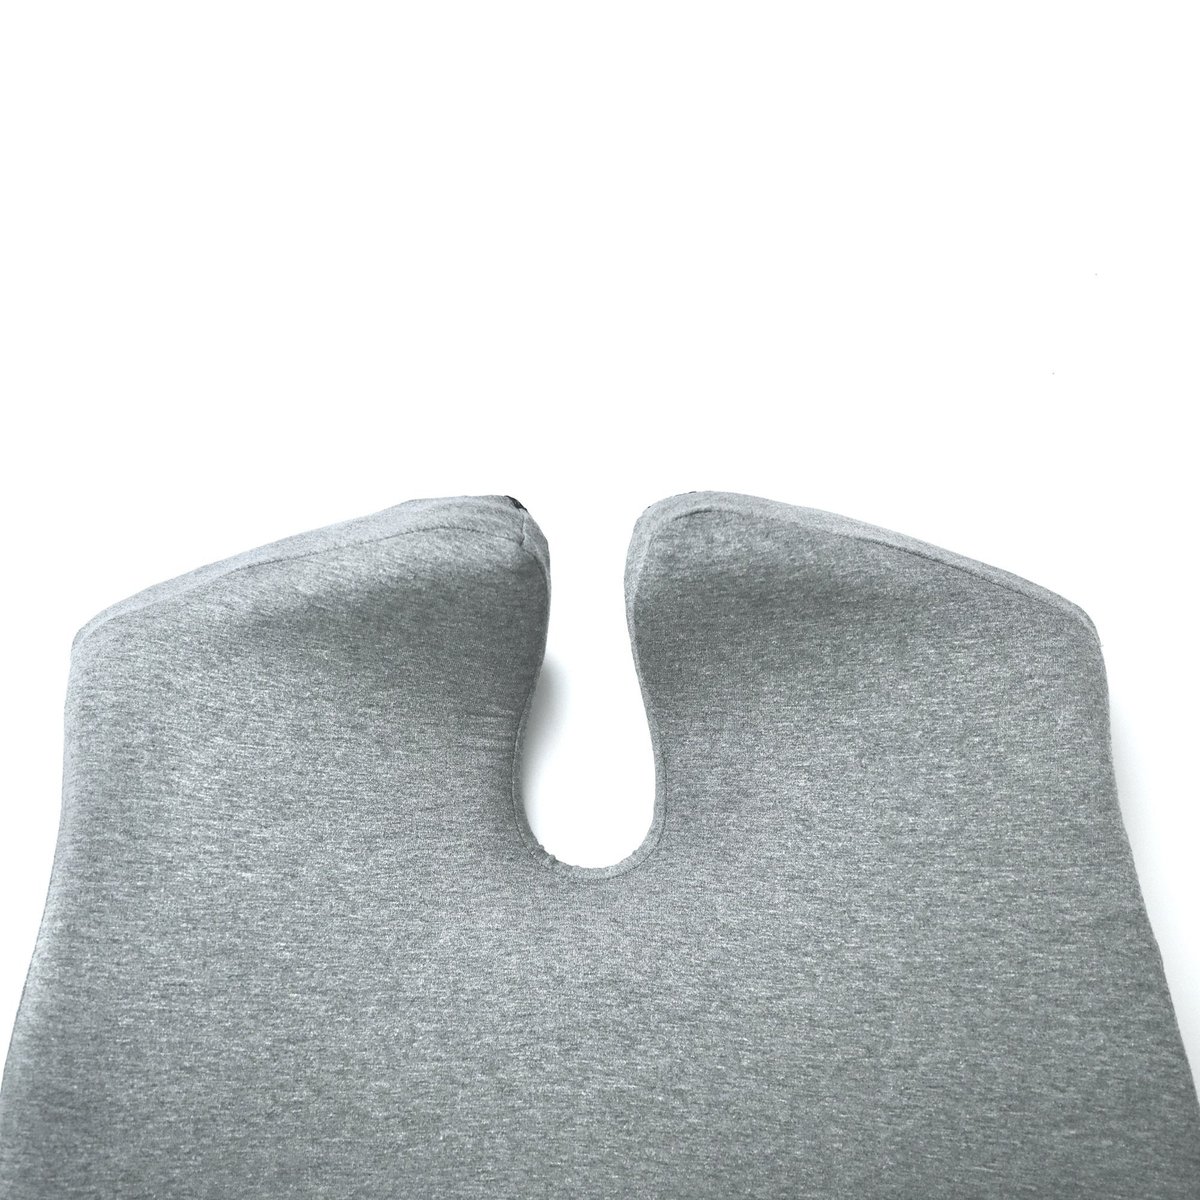 Cushion Lab Patented Pressure Relief Seat Cushion for Long Sitting Hours on